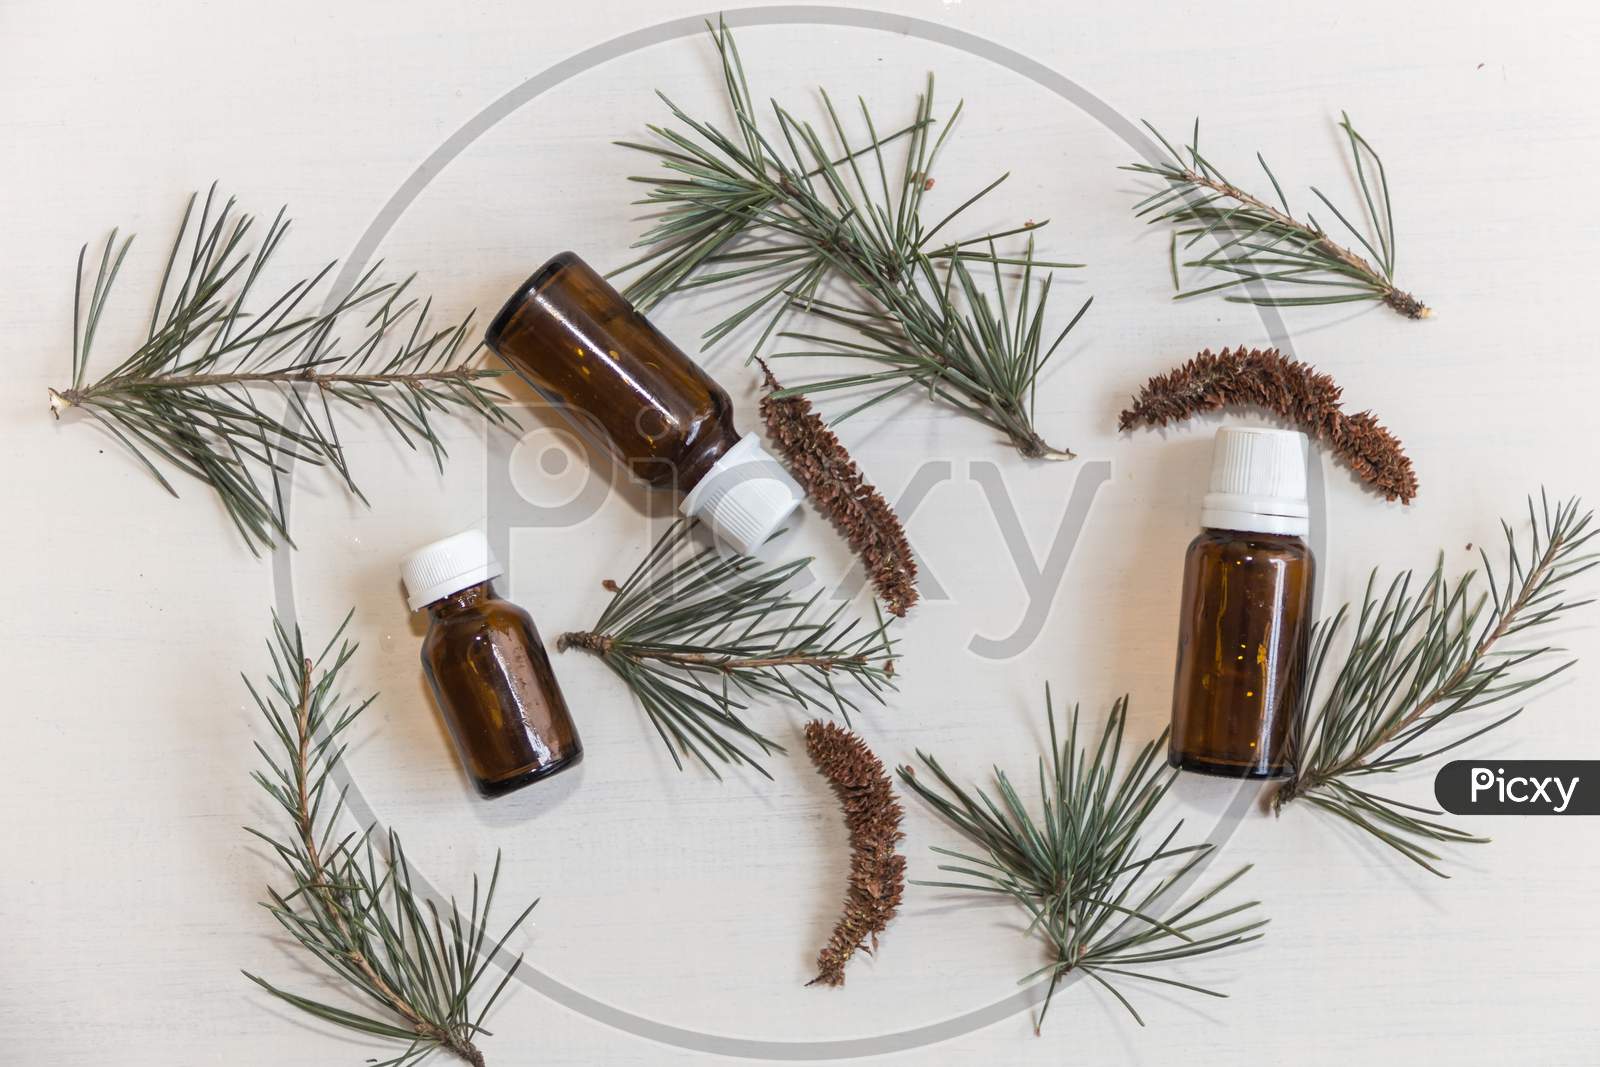 Top View Bottles With Cedar Oil. Aromatherapy And Natural Cosmetics Concept Background